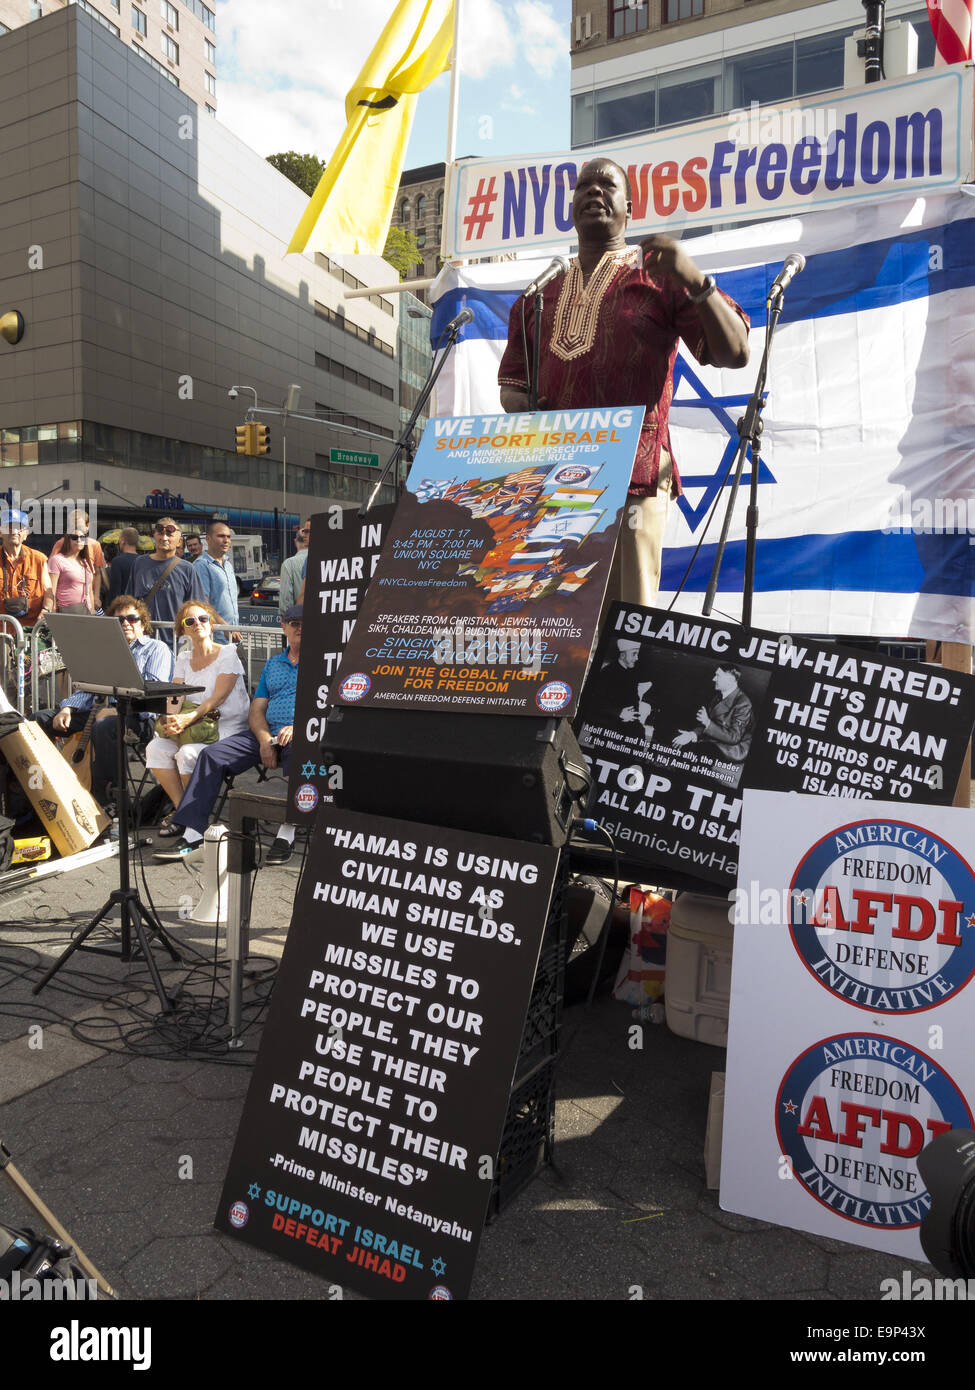 Rally in Support of Israel and Persecuted Religious Minorities under Islam at Union Square in New York City, August 17, 2014. Stock Photo